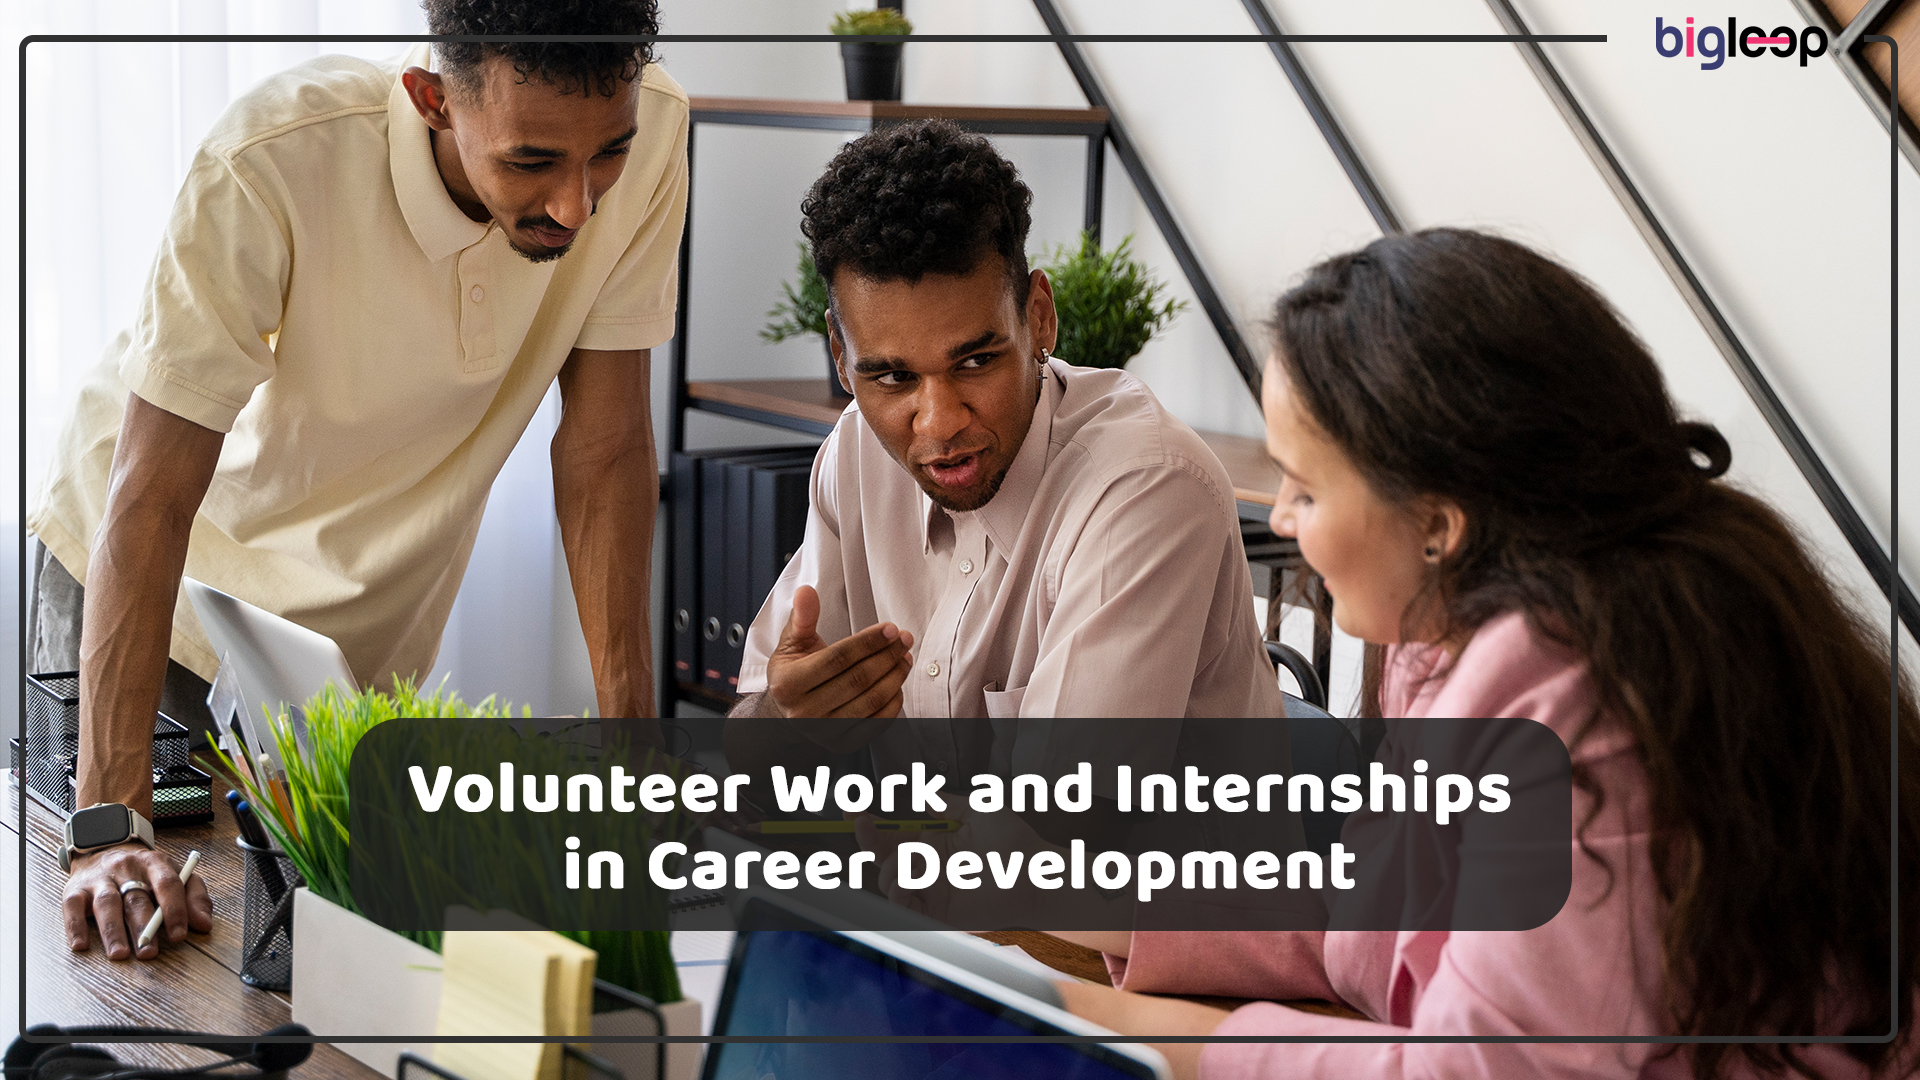 The Role of Volunteer Work and Internships in Career Development: How to Make the Most of These Opportunities